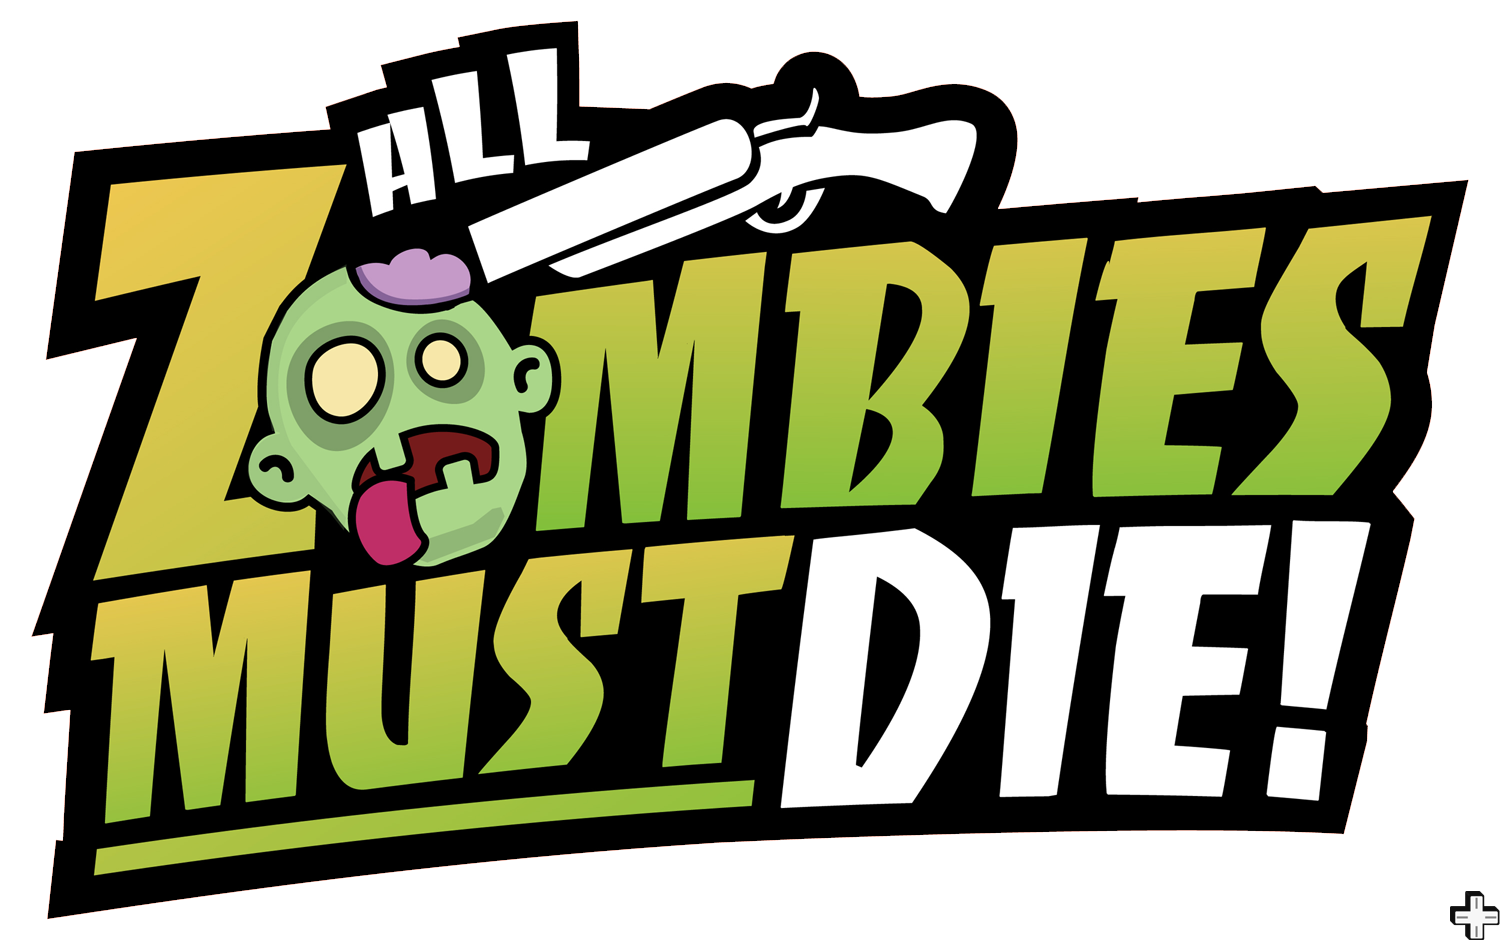 All Zombies Must Die! - XBOX 360 